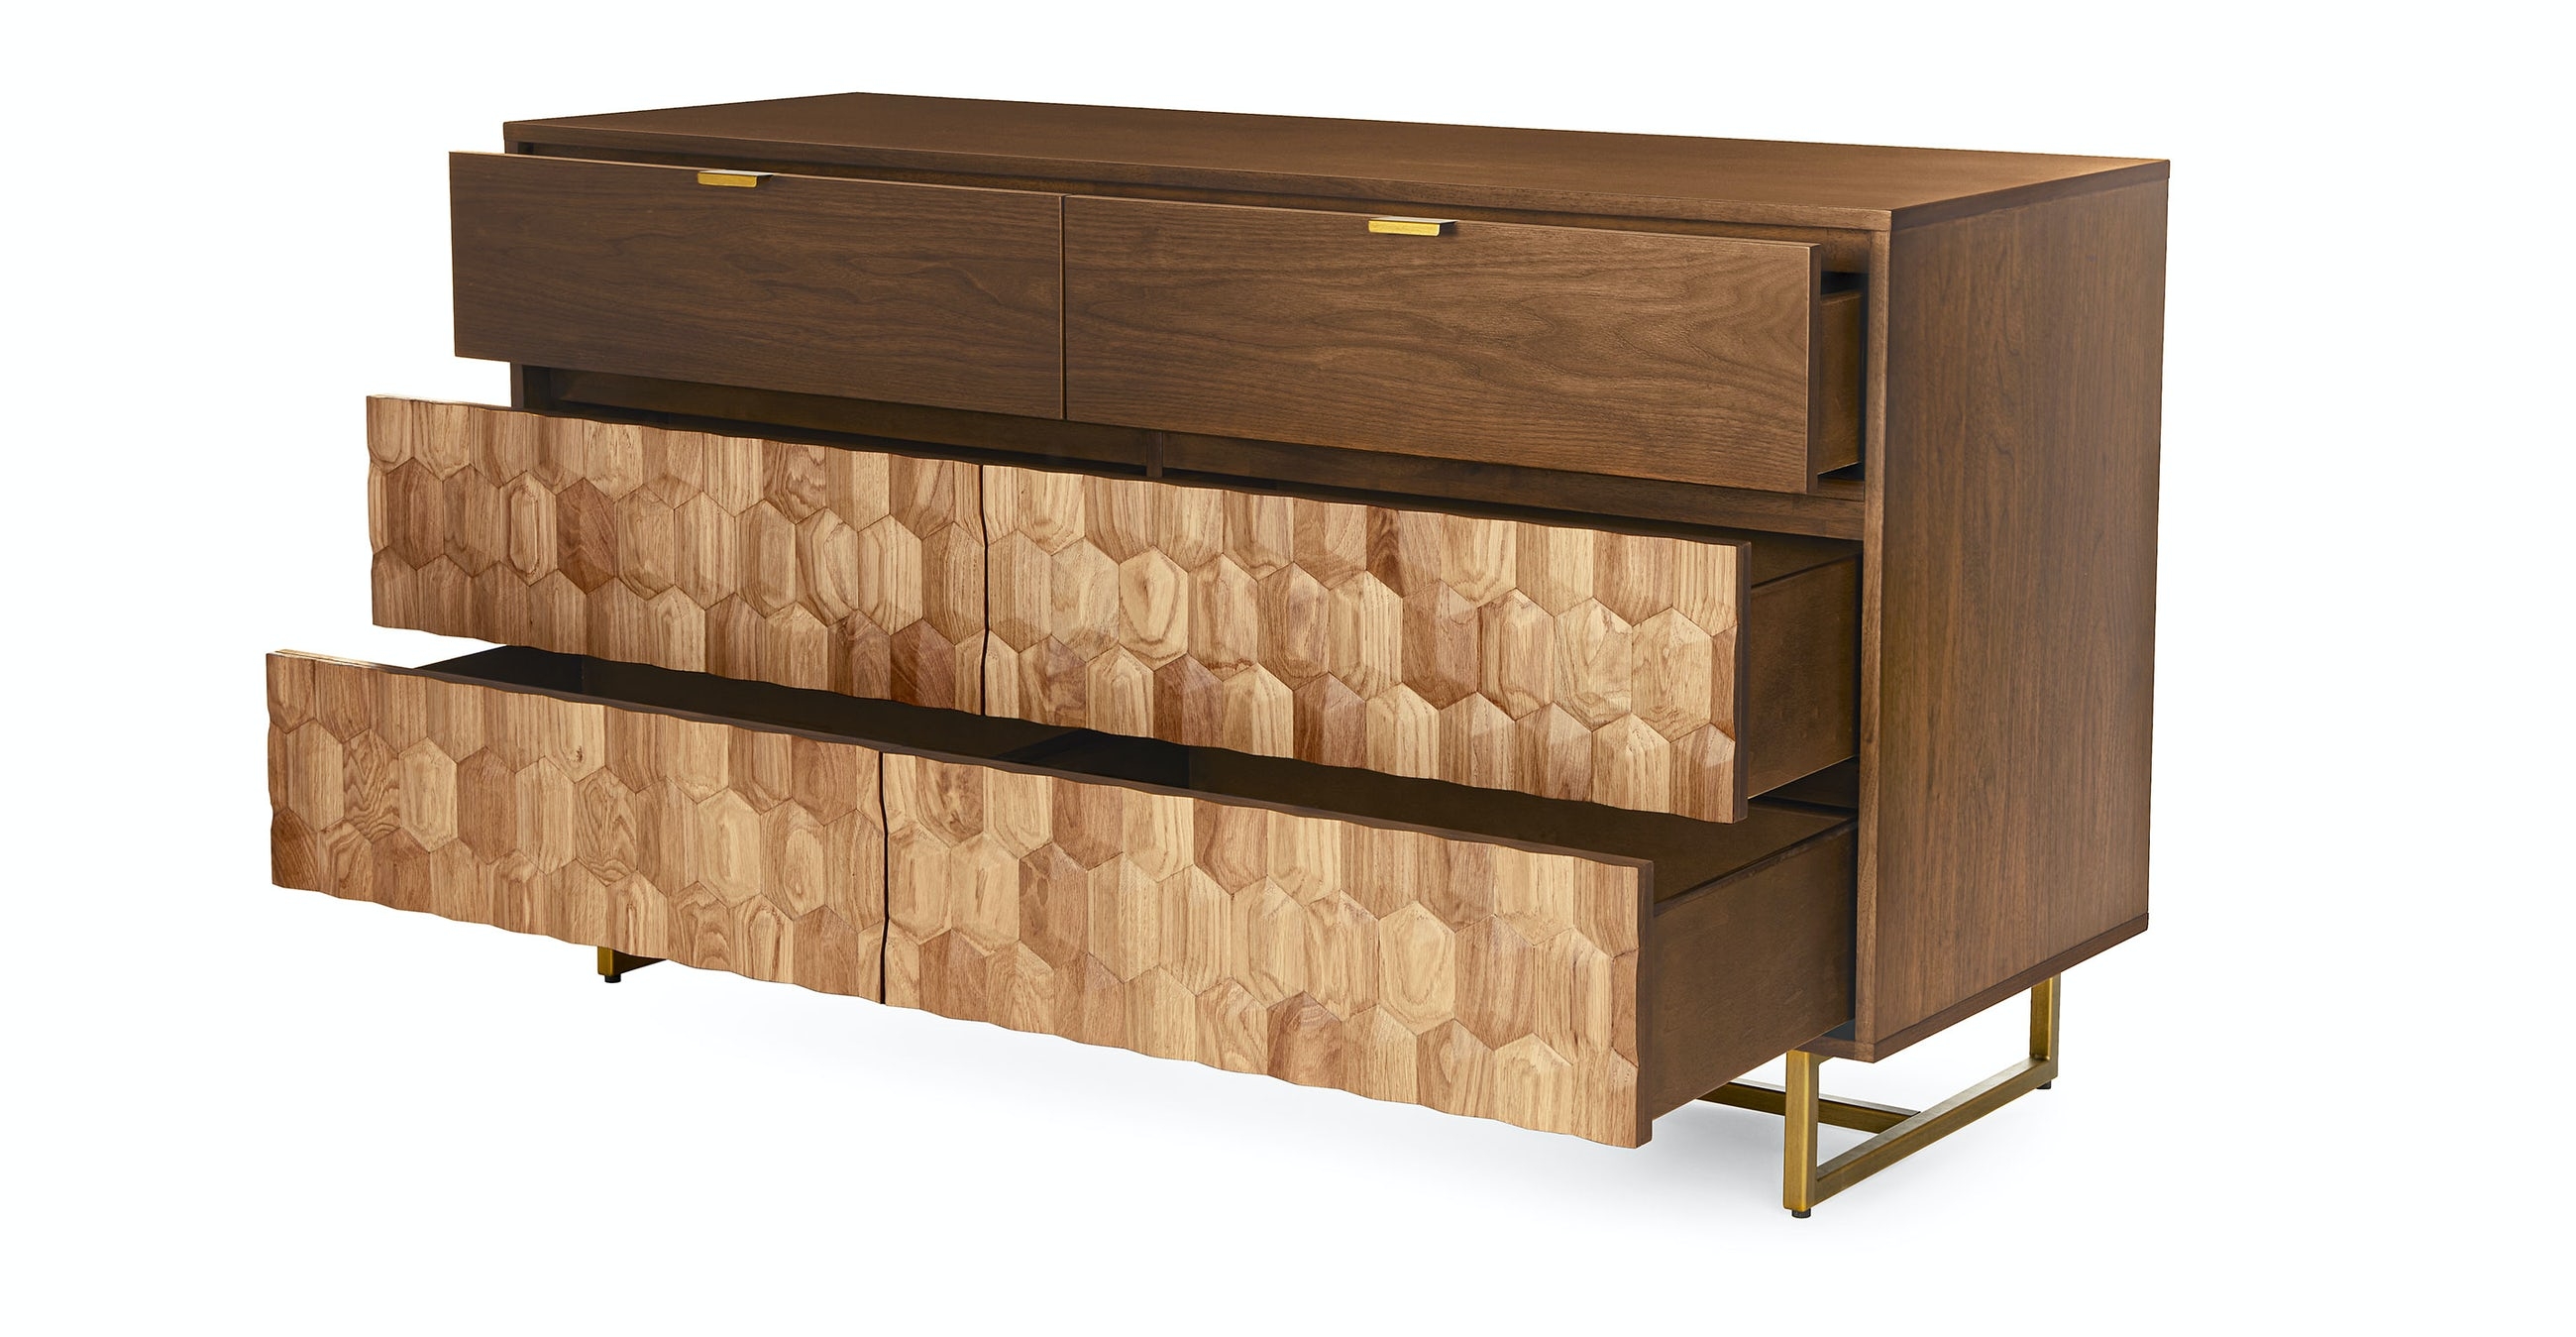 Geome 6-Drawer Double Dresser - Image 1